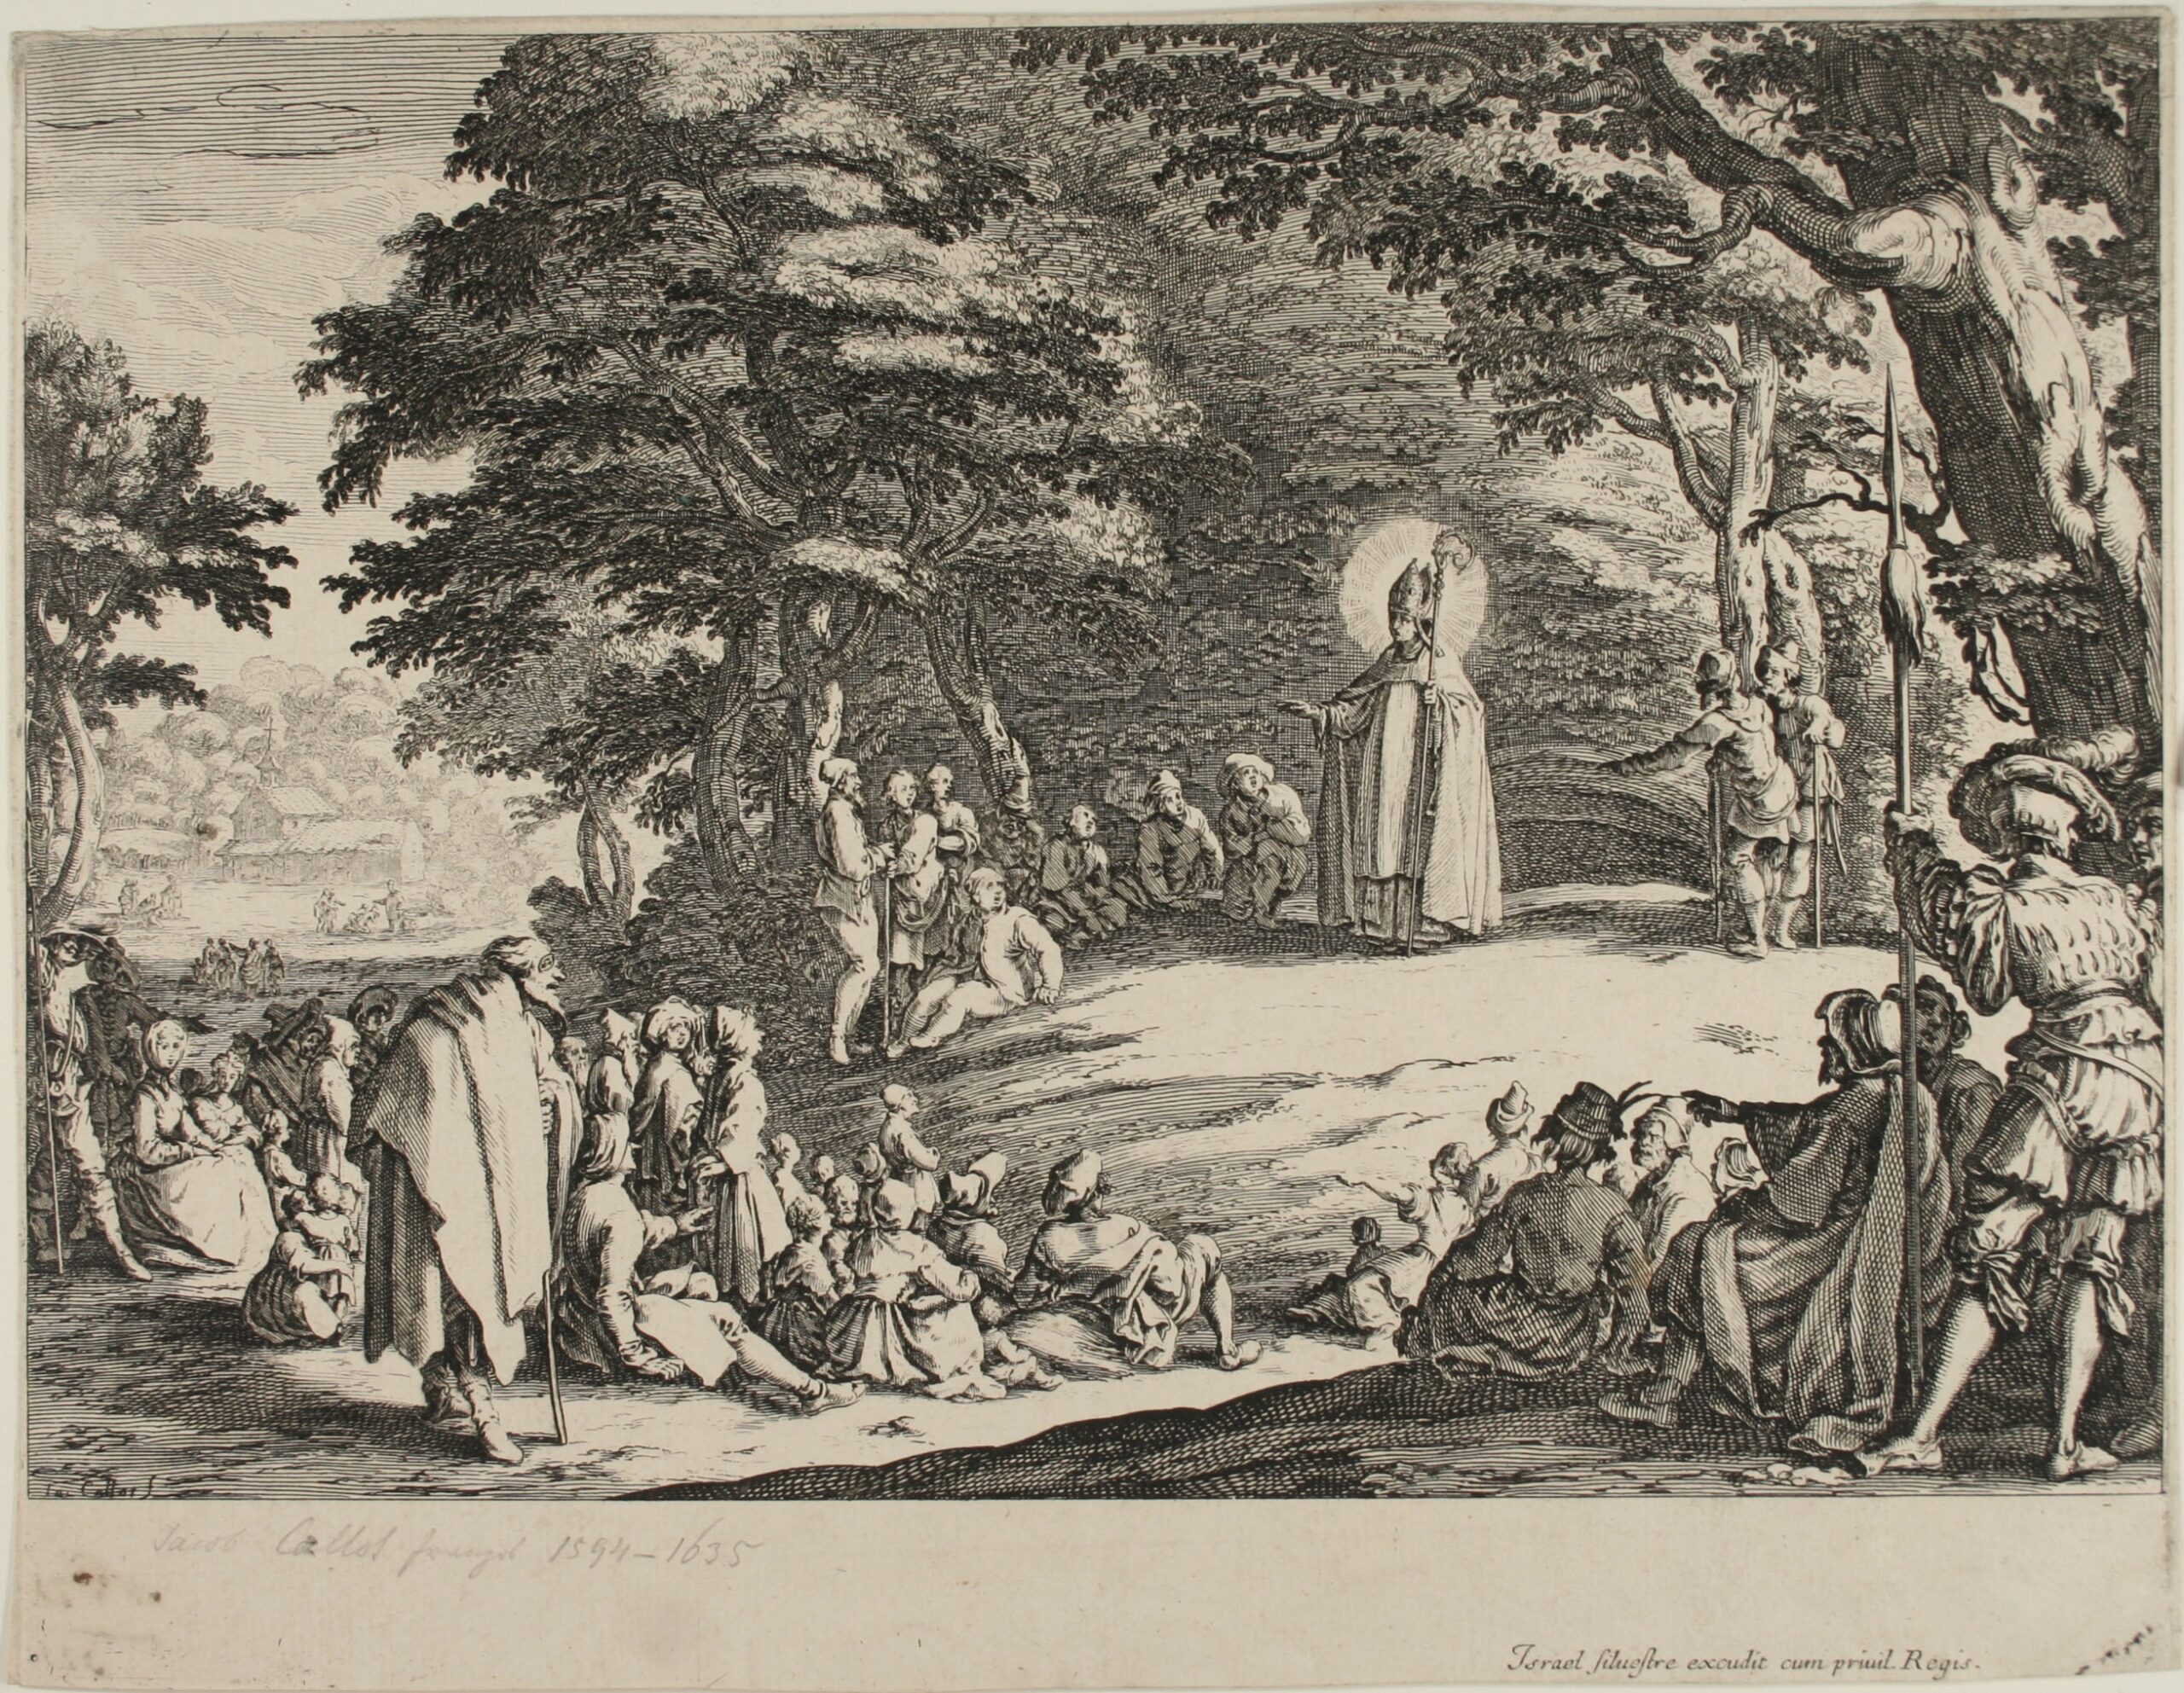 Jacques Callot (French, 1592-1635), Saint Amond, ca. 1622, etching. Museums Collections